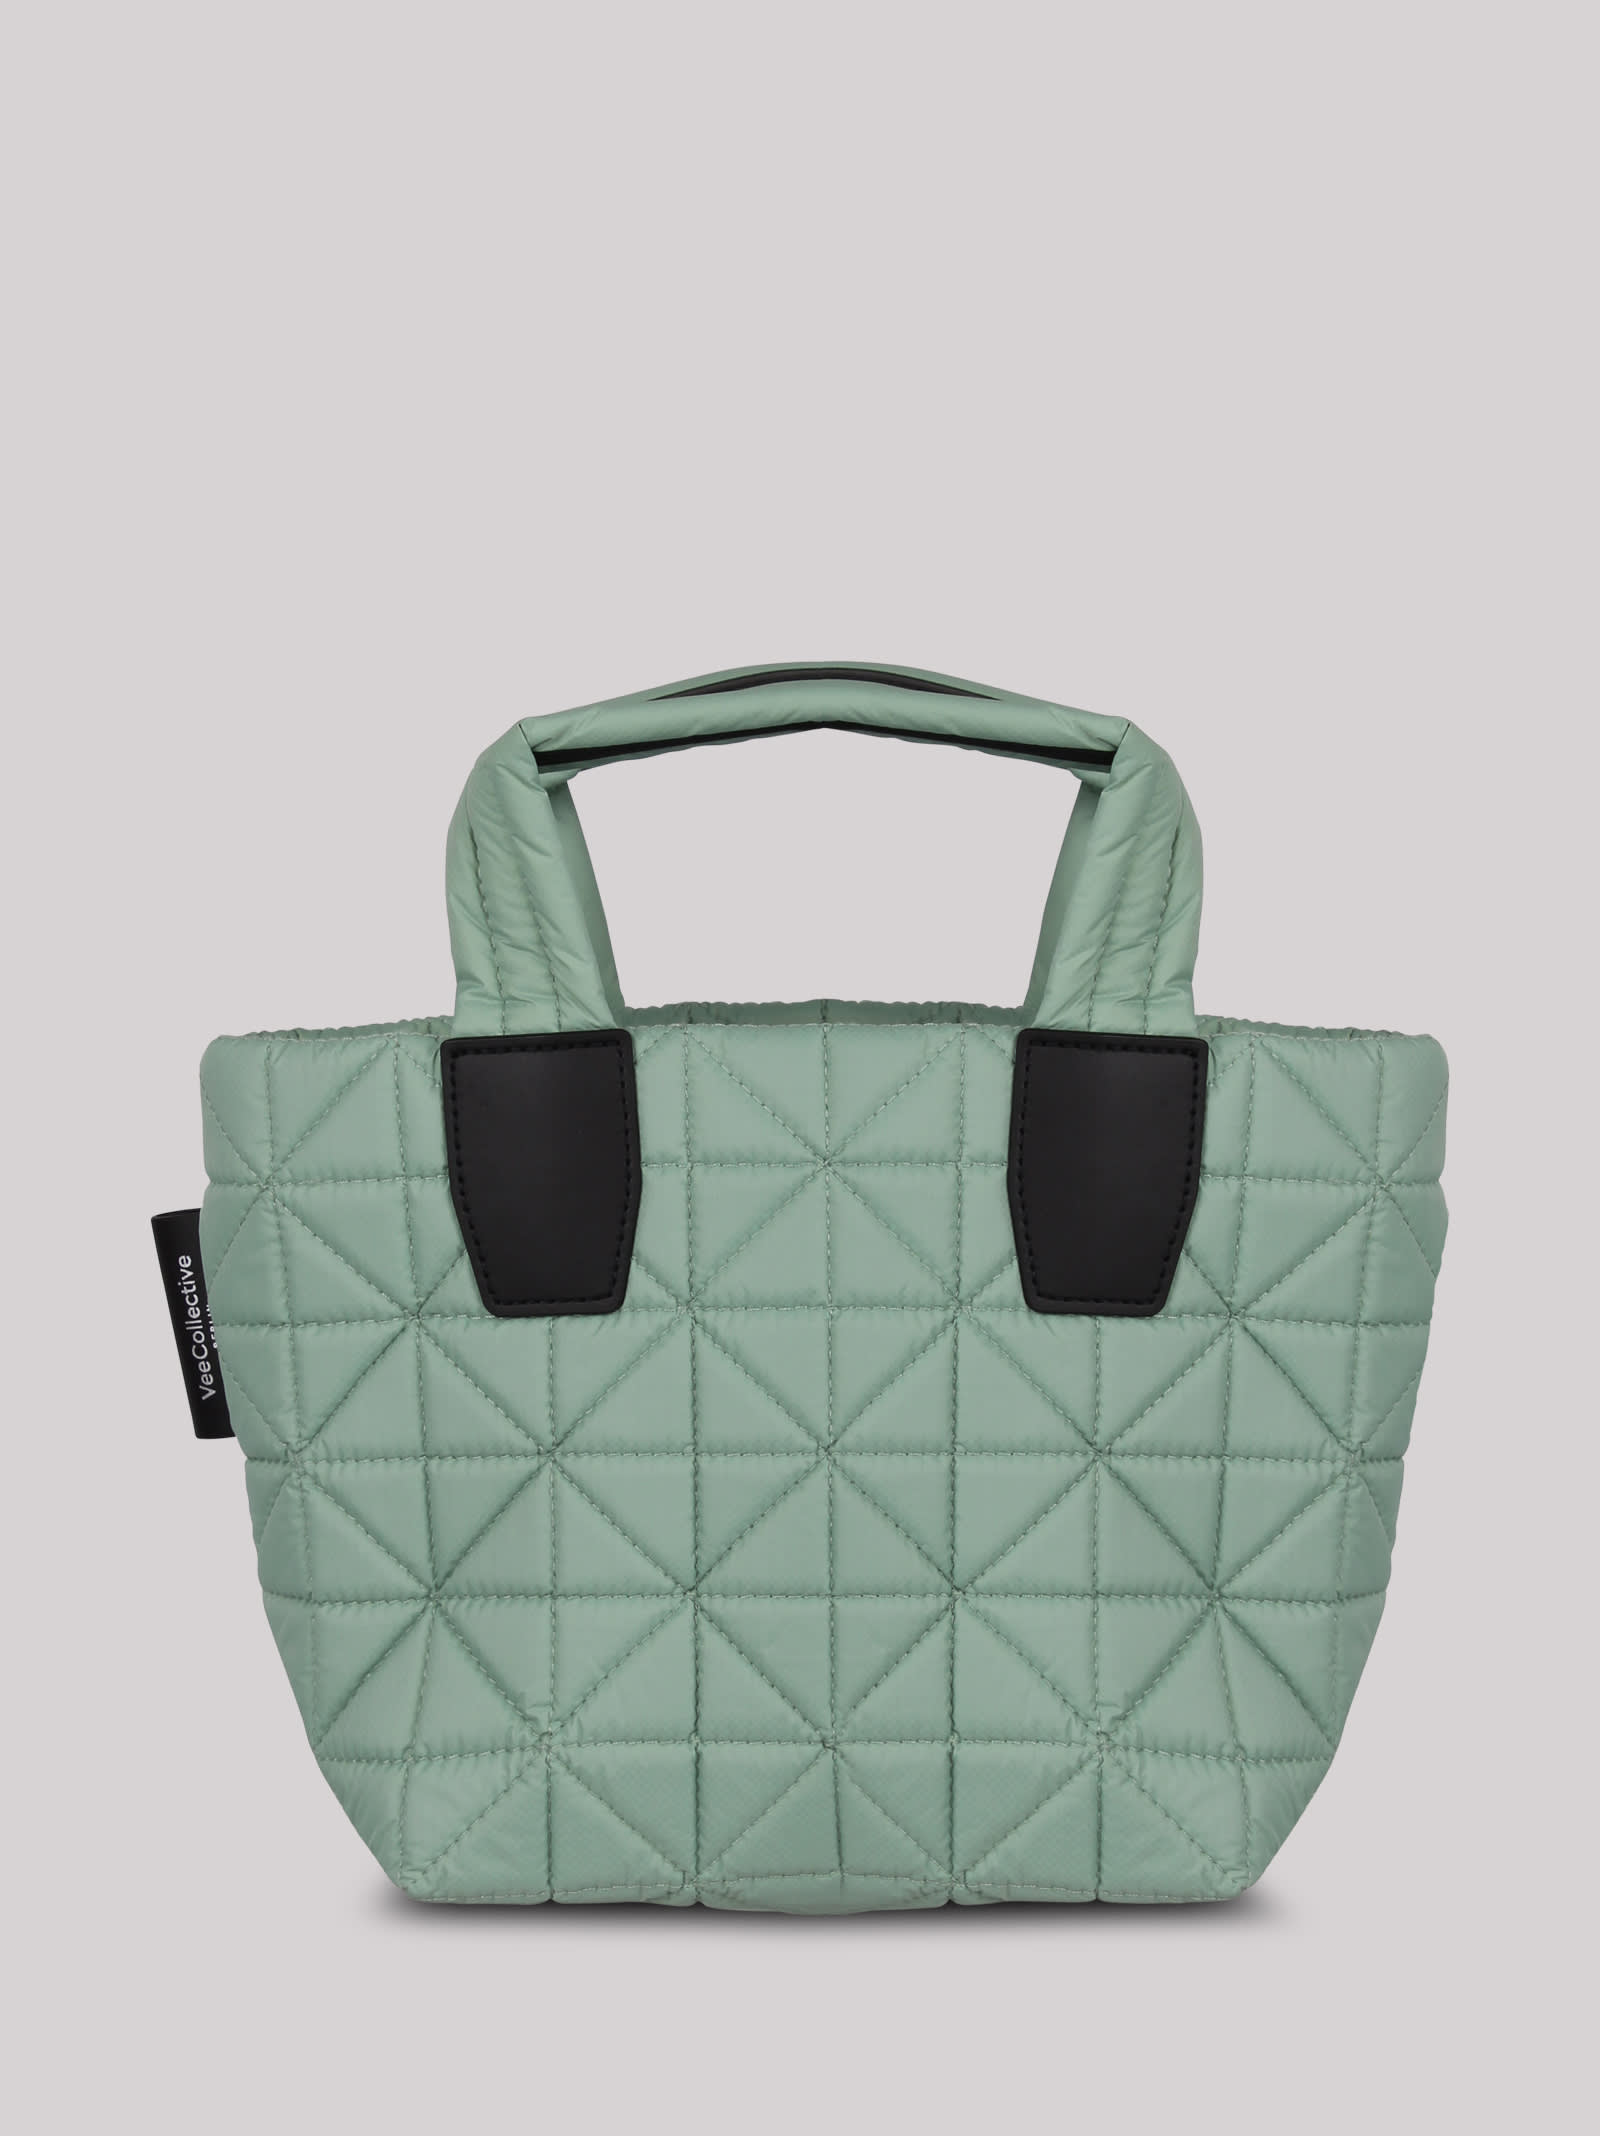 VEECOLLECTIVE VEE COLLECTIVE SMALL VEE PADDED TOTE BAG